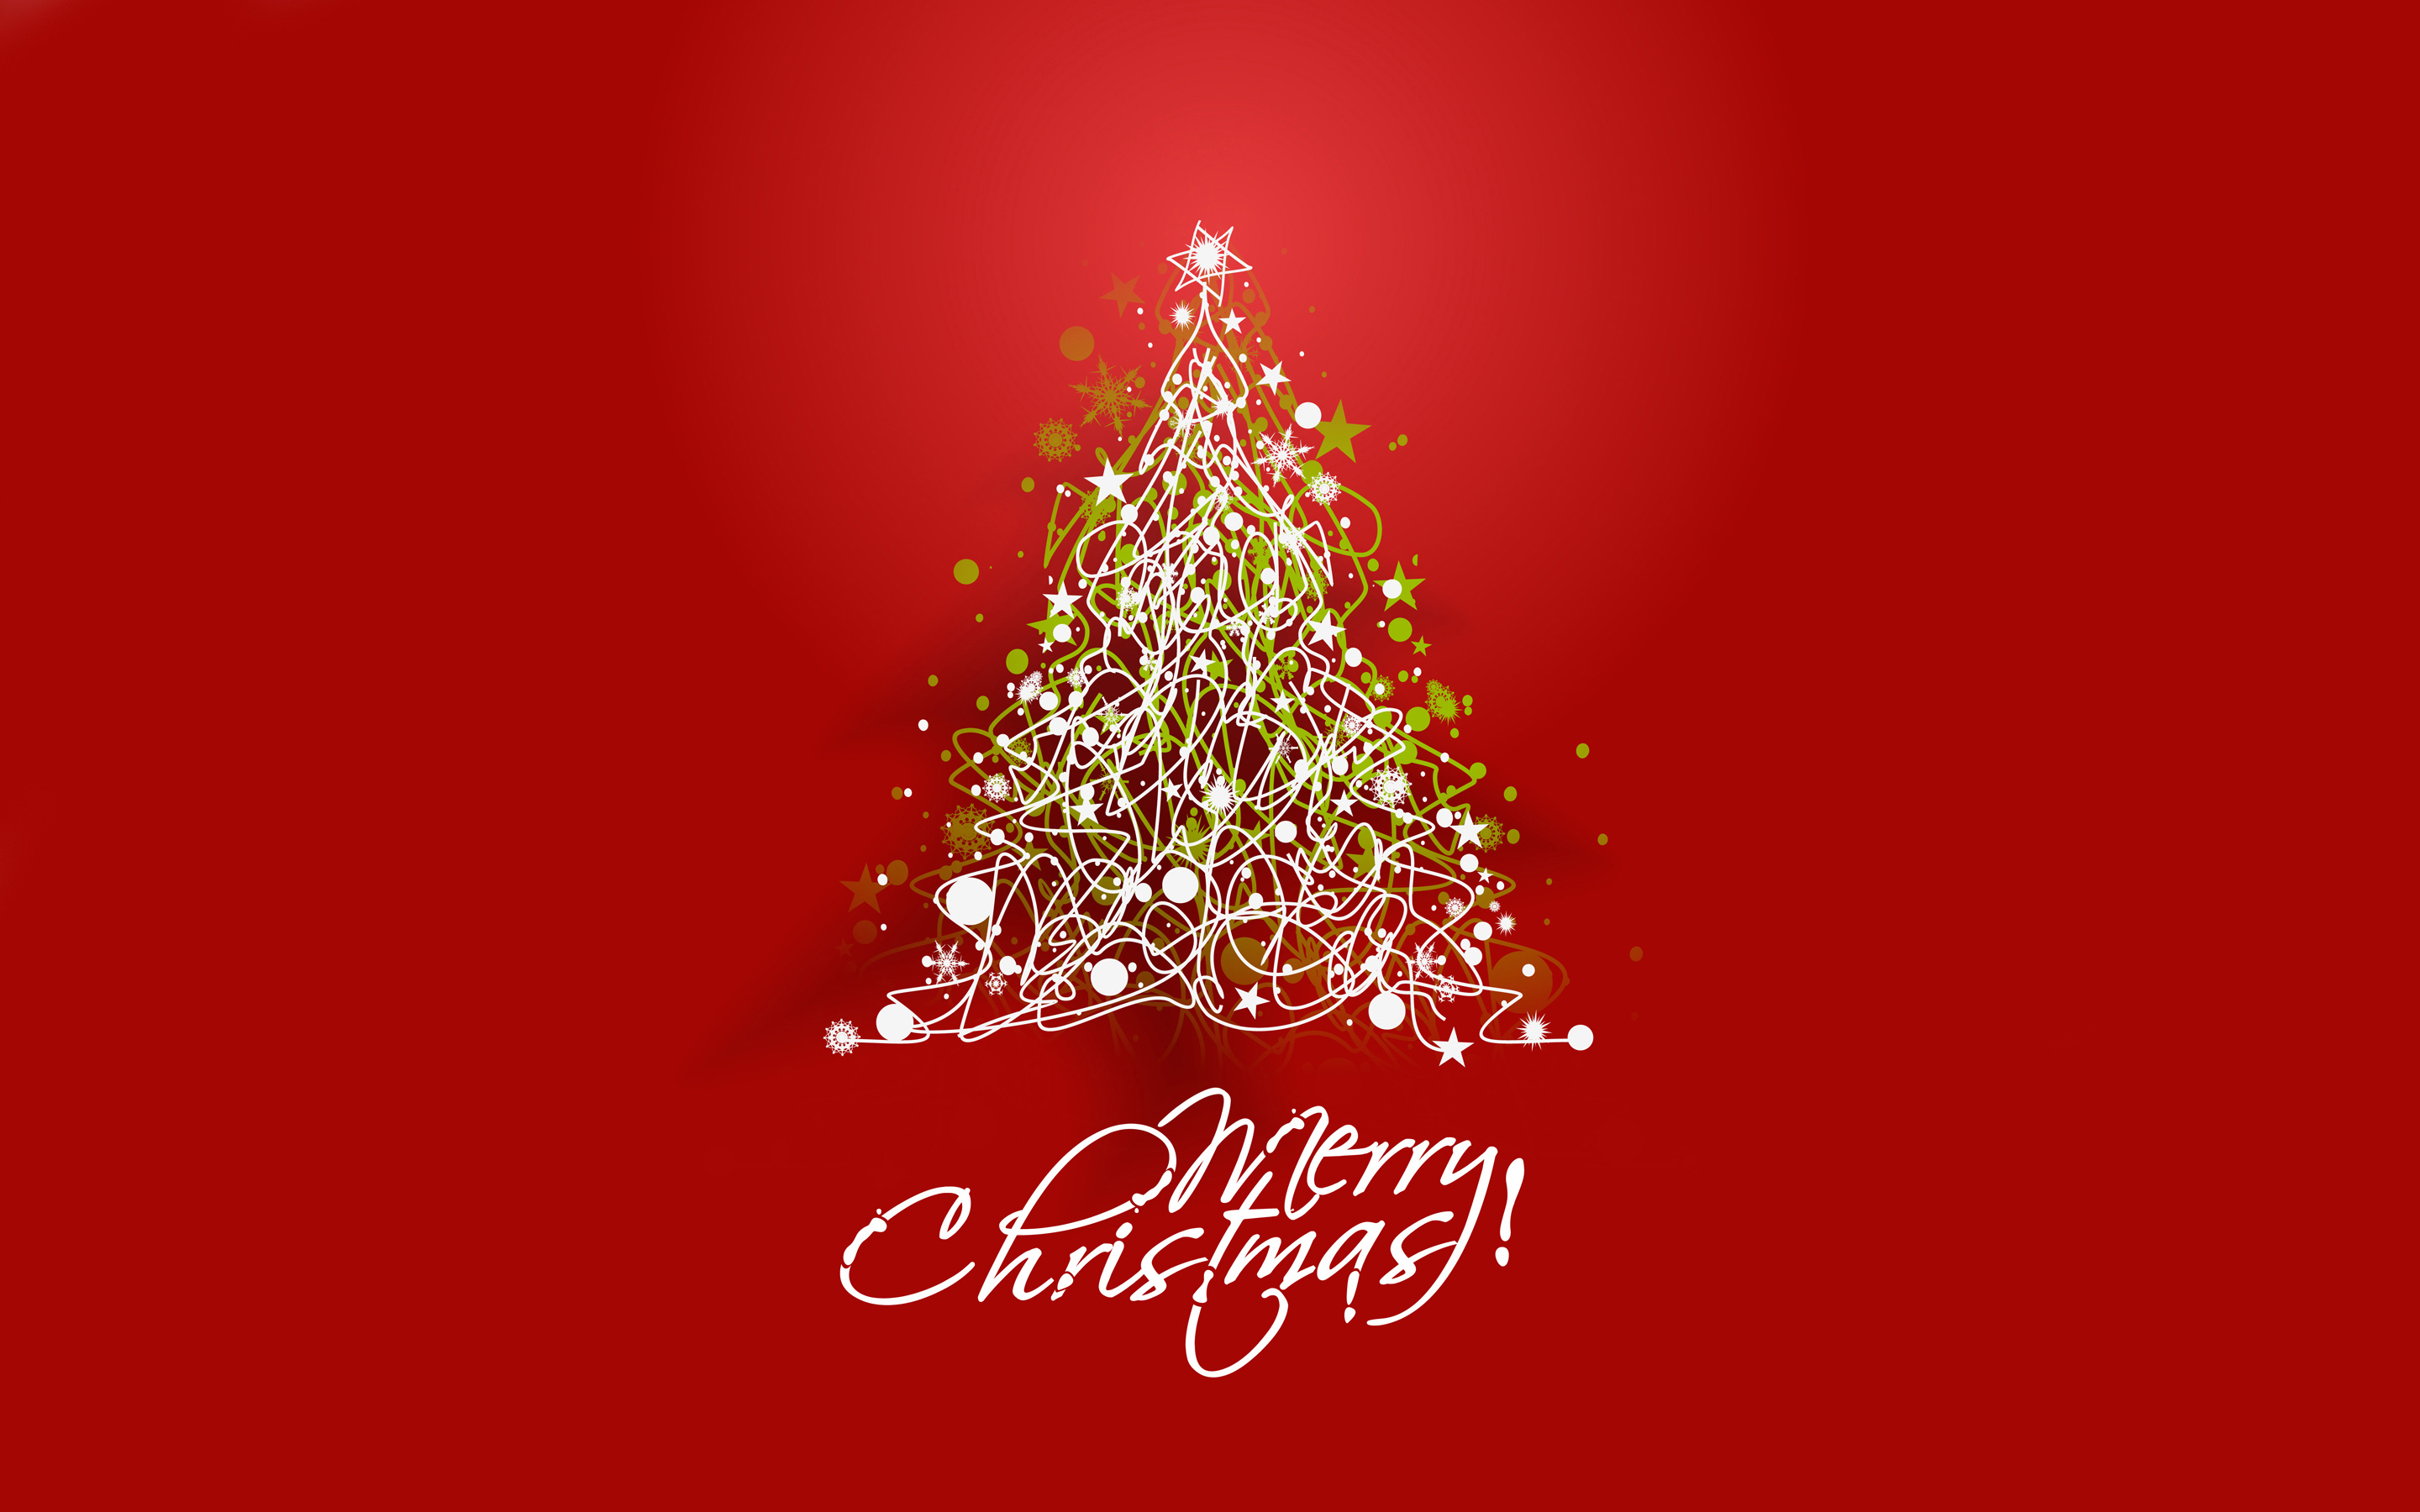 HD Merry Christmas 2017 Wallpapers | Images for Merry Christmas 2017